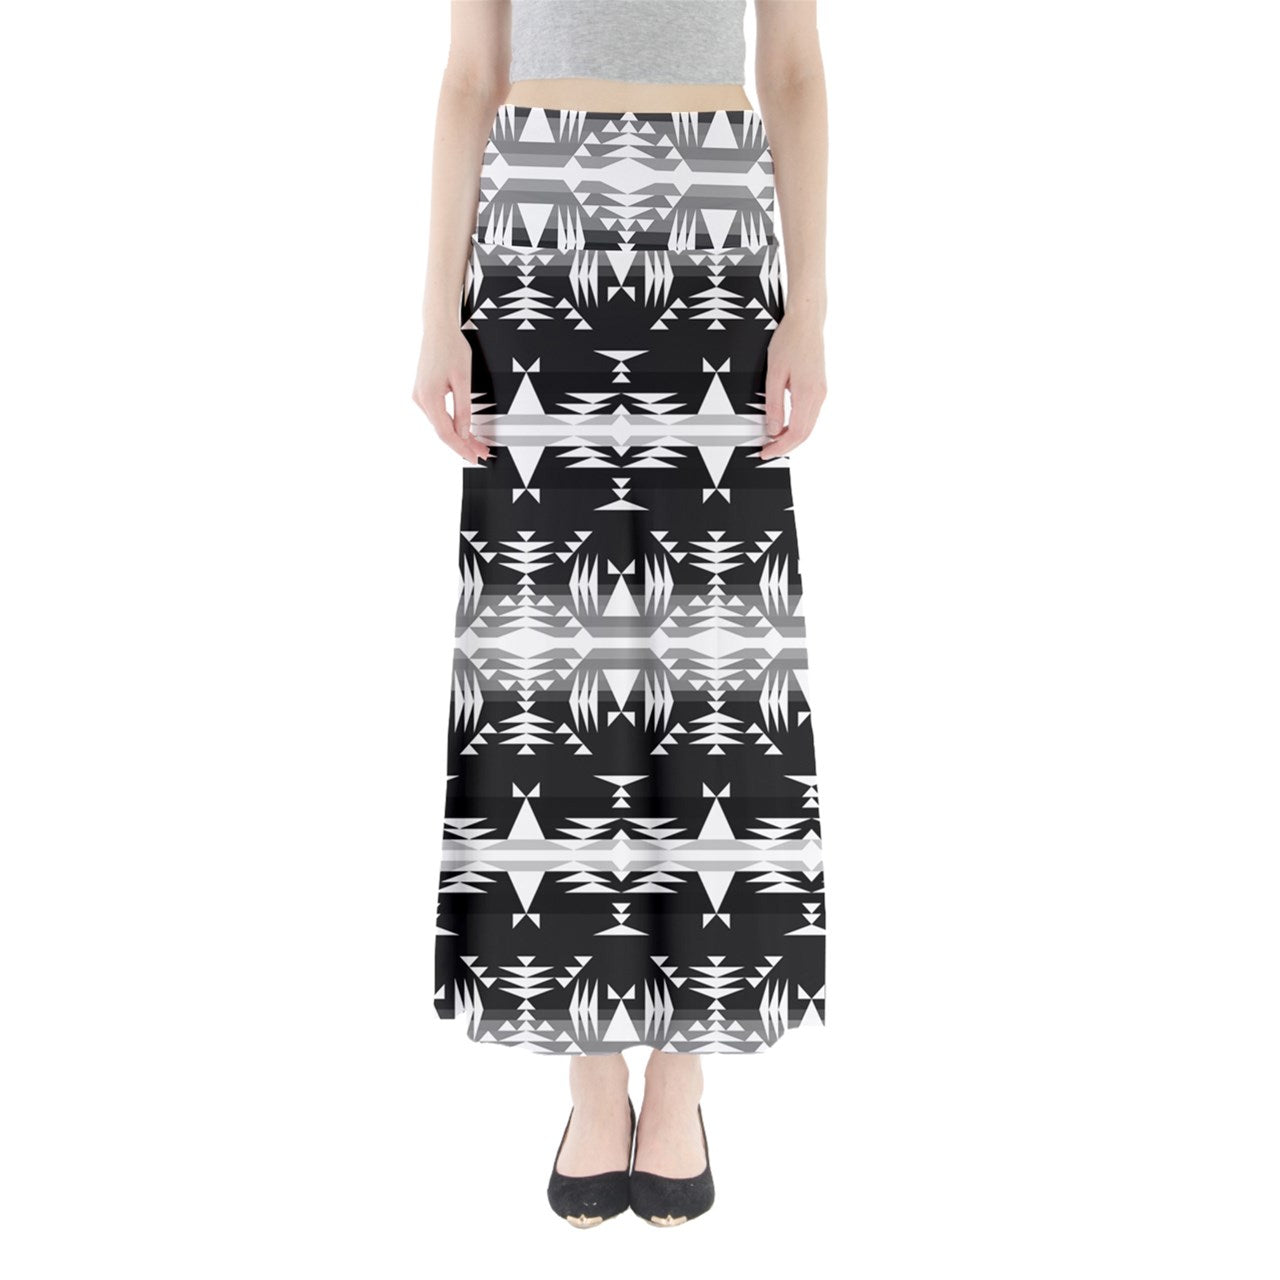 Between the Mountains Black and White Full Length Maxi Skirt